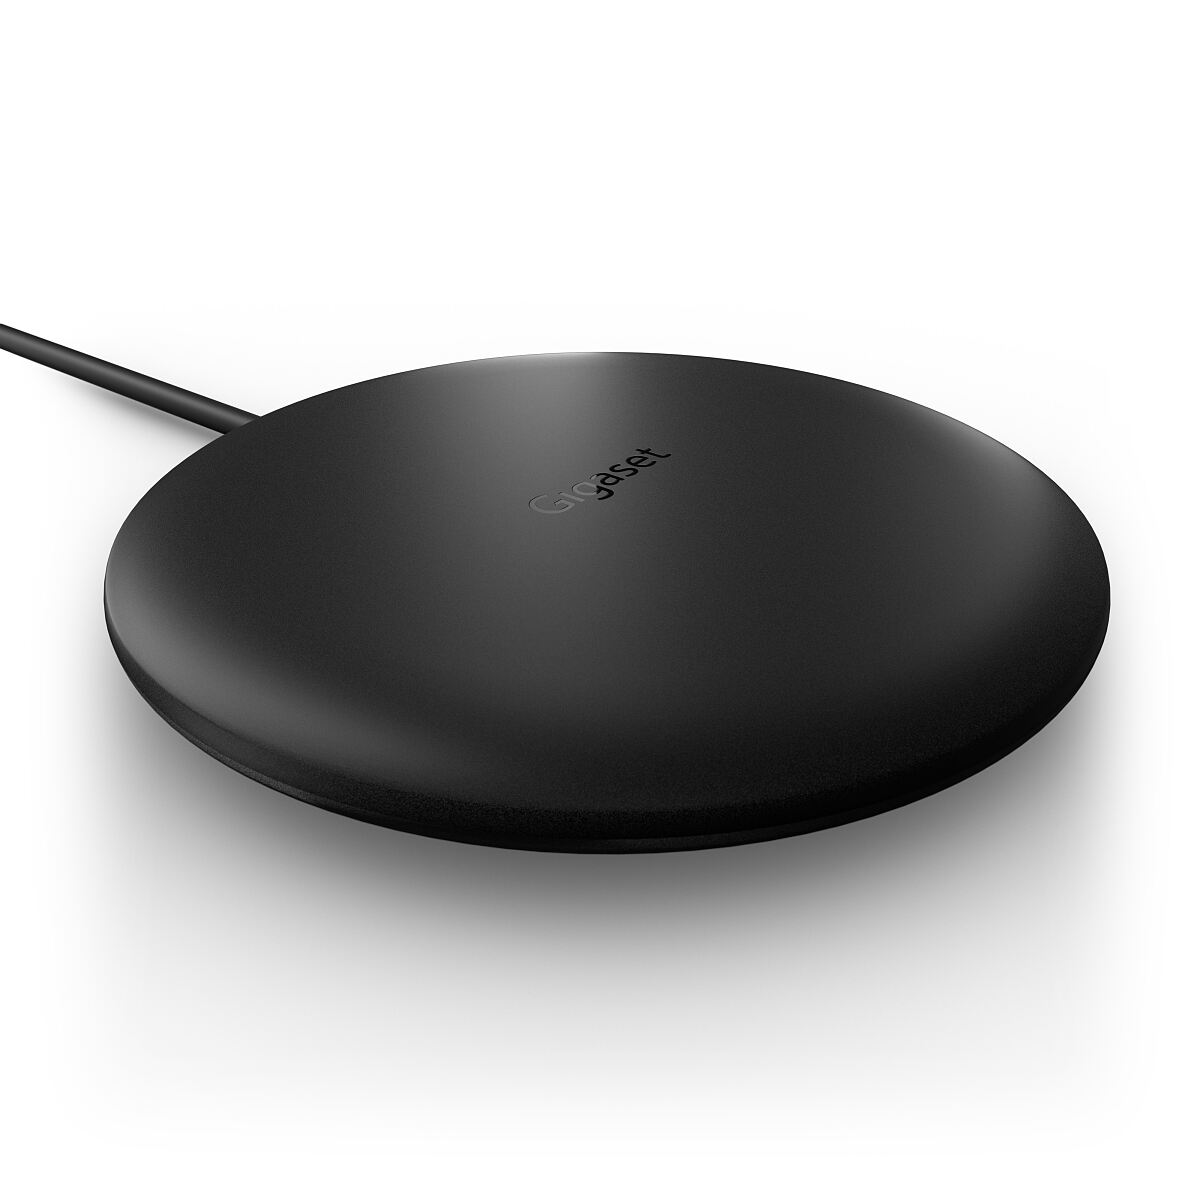 Gigaset Wireless Fast Charger 2